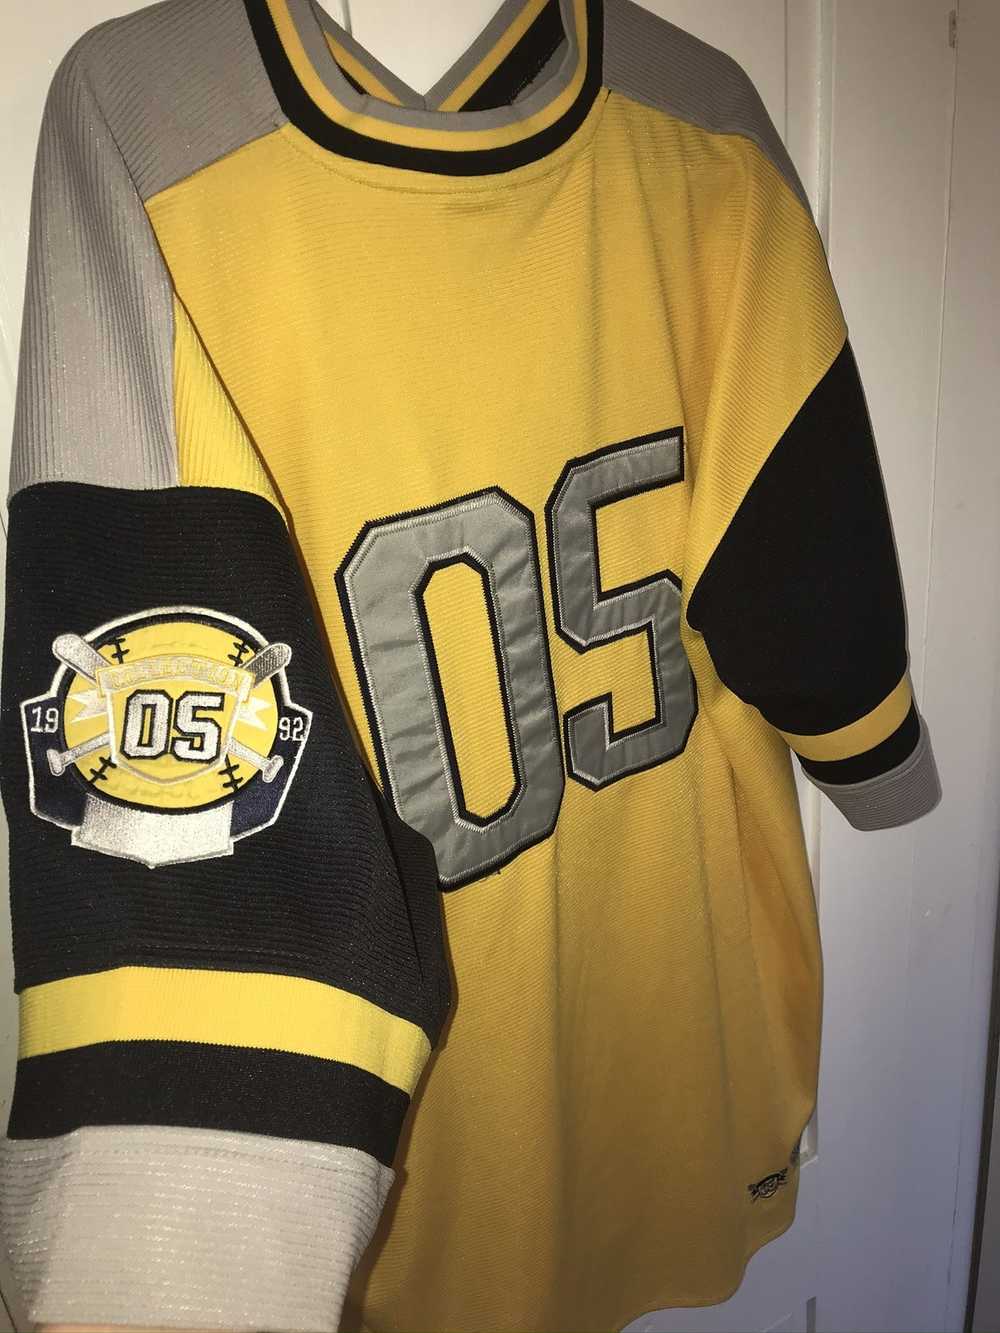 Fubu Jersey from 2005 collection - image 2